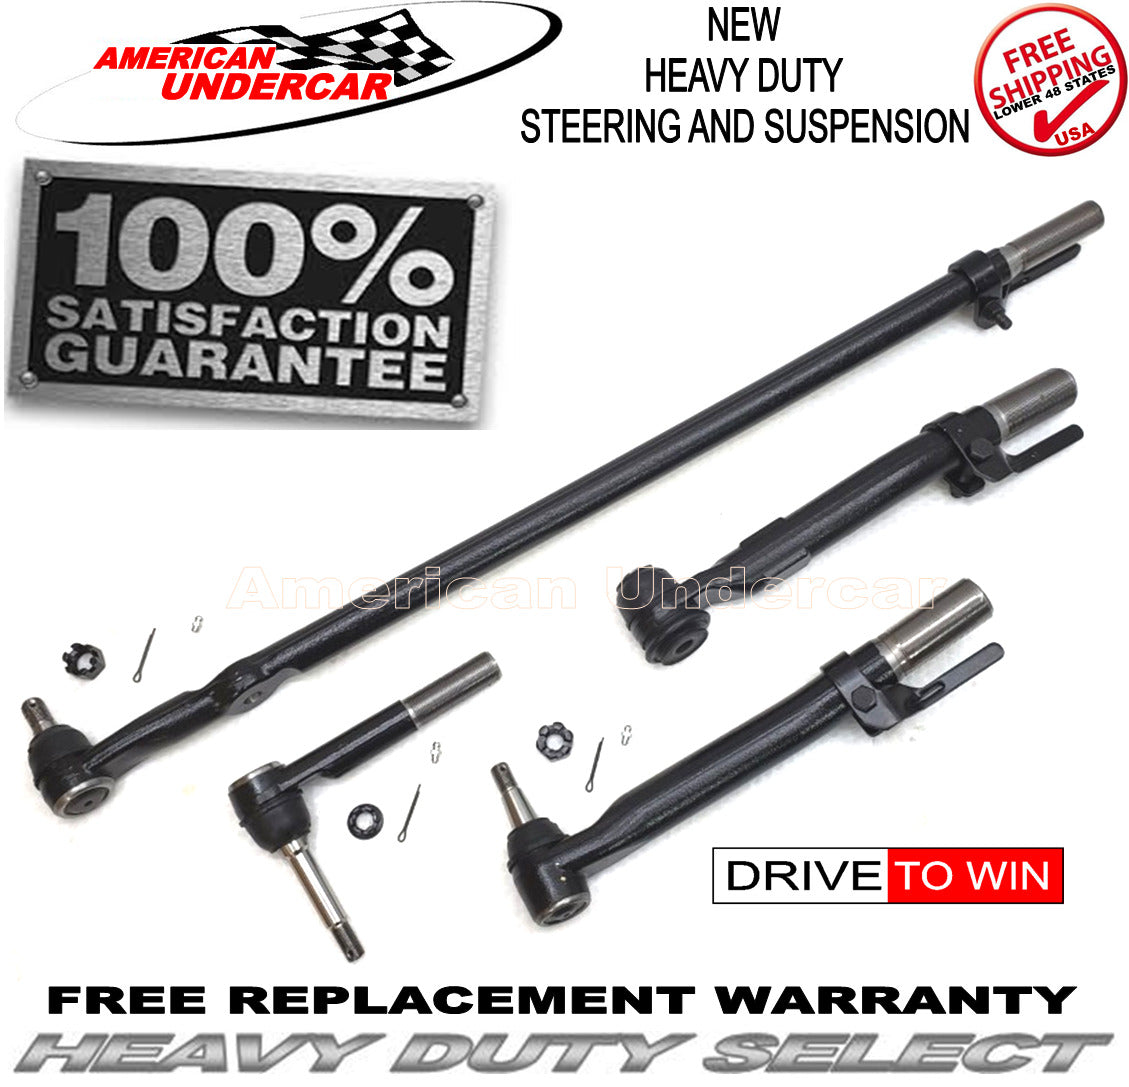 HD Tie Rod Drag Link Steering Kit for 2008-2010 Ford F250, F350 4x4